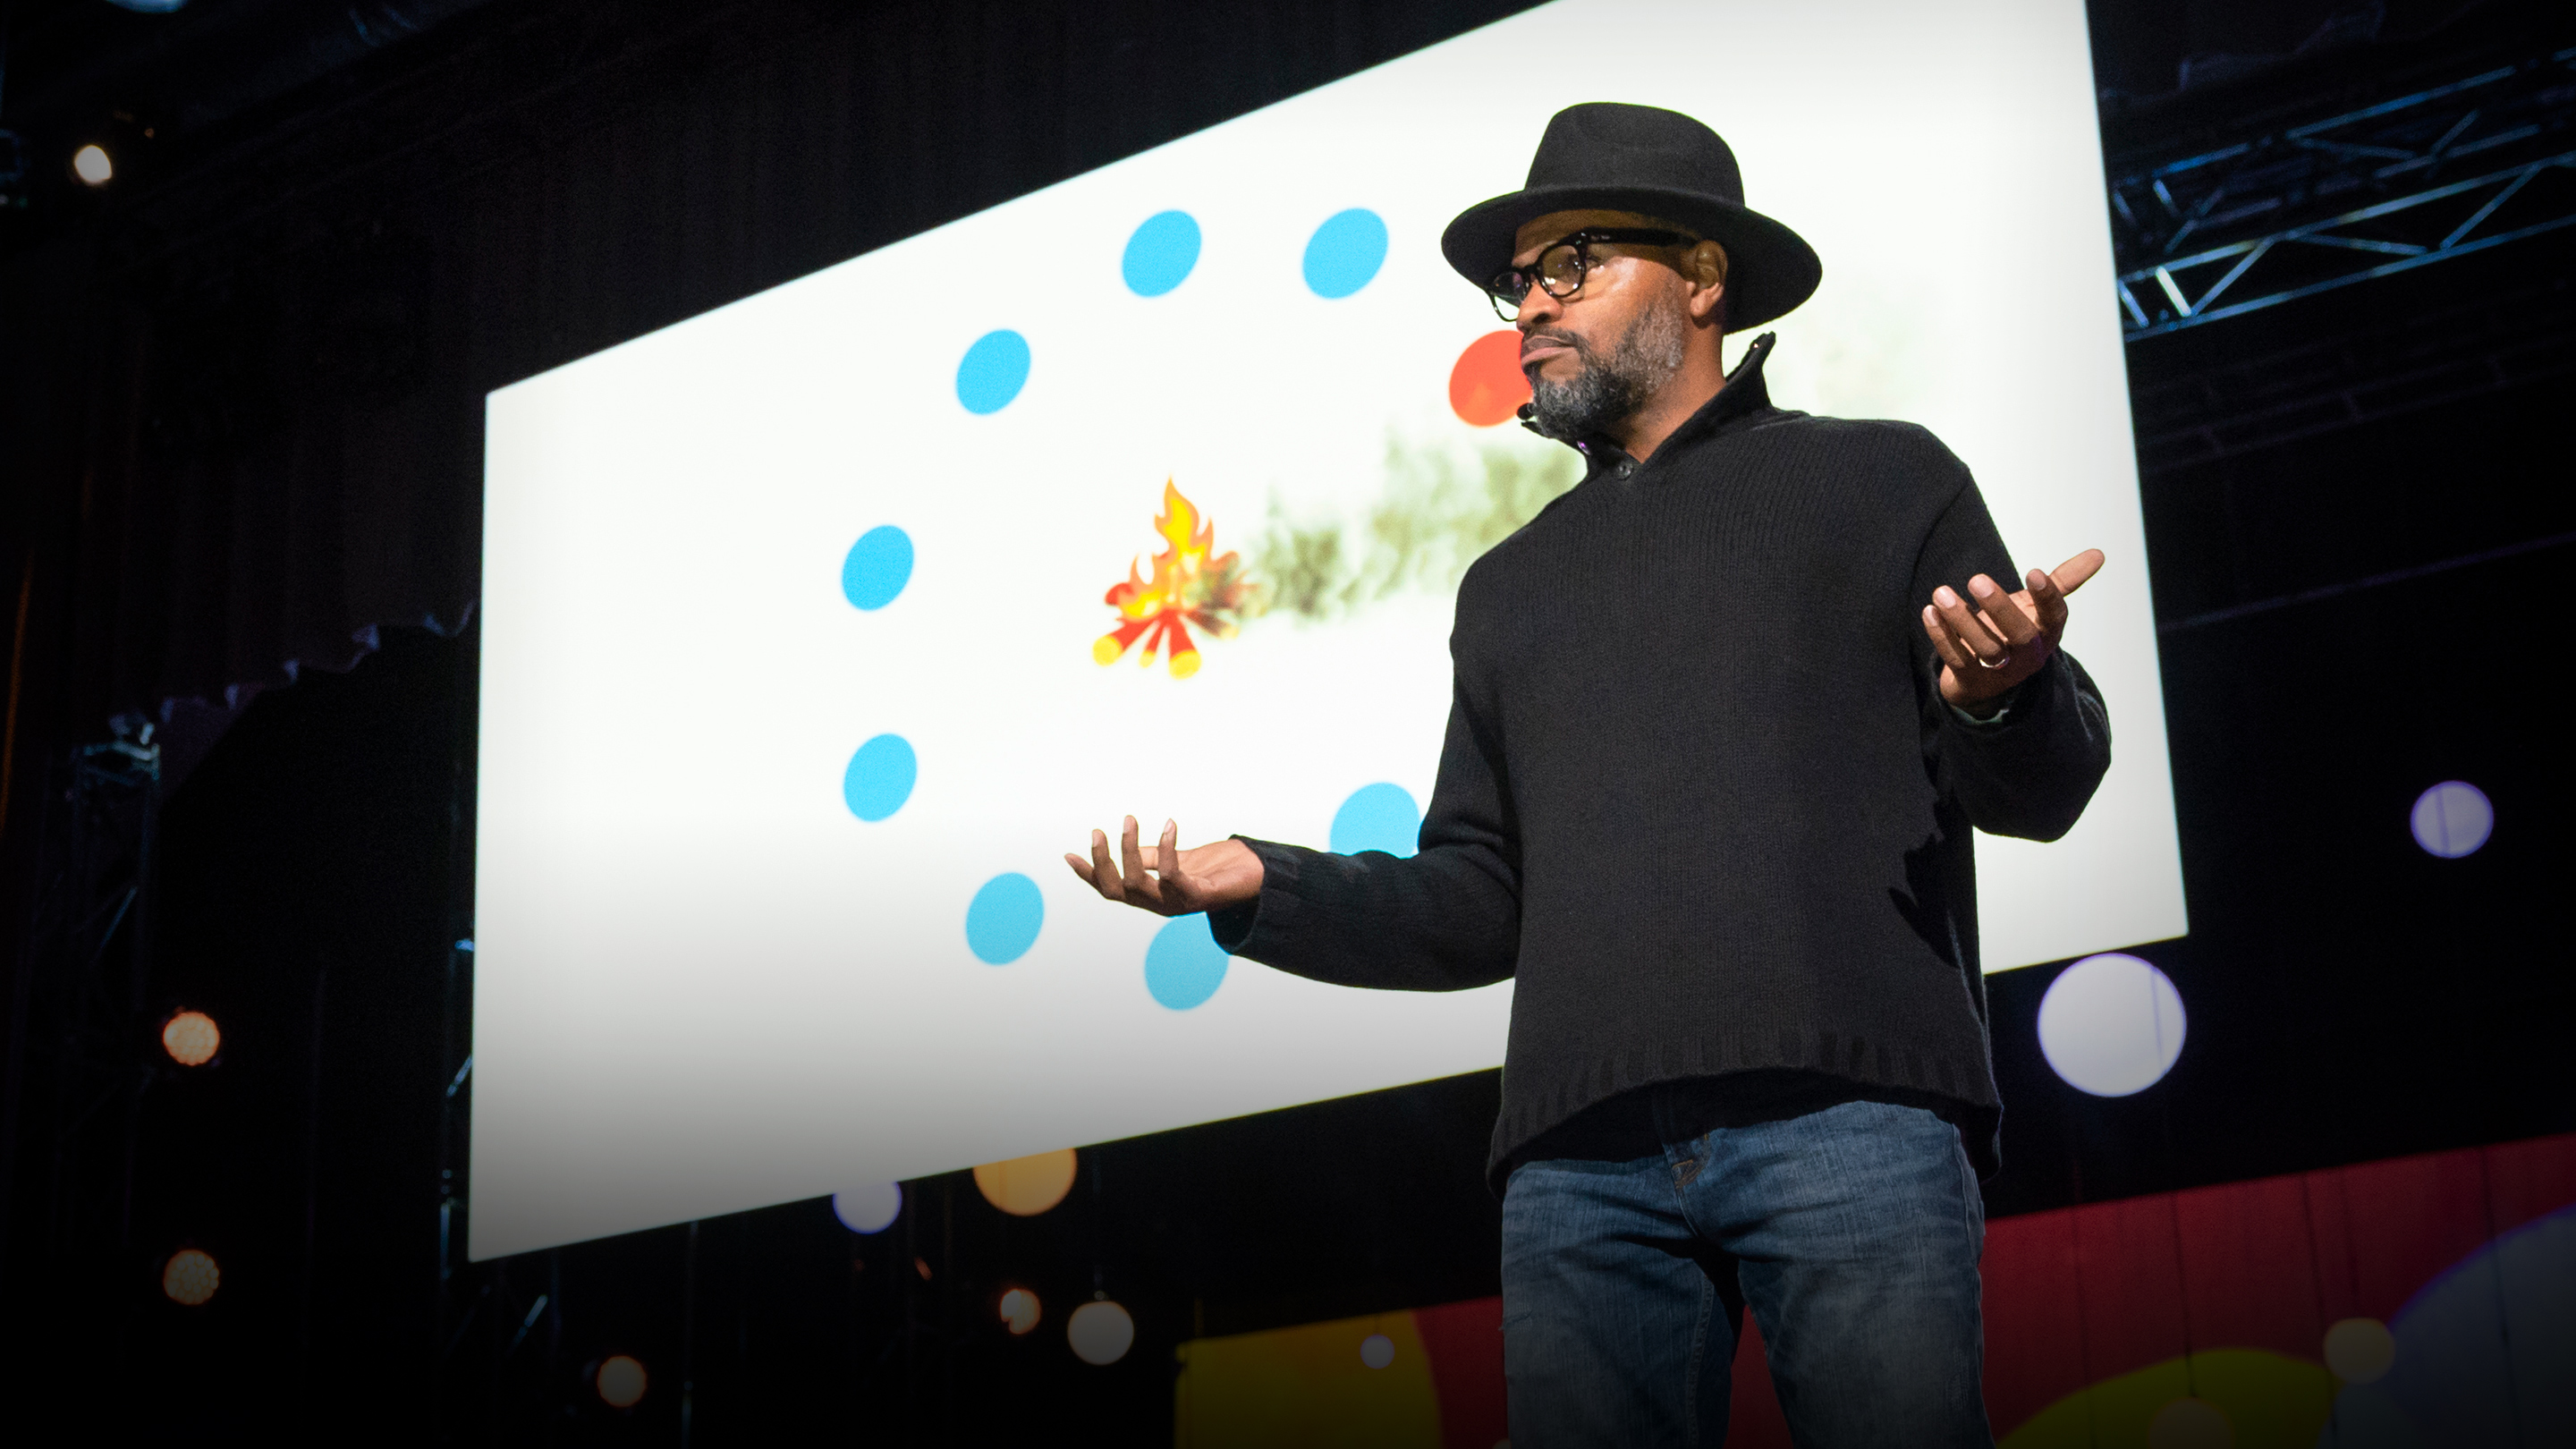 Watch Stephen DeBerry's Ted Talk On Why The East Sides Of Cities Are Some Of The Most Disadvantaged